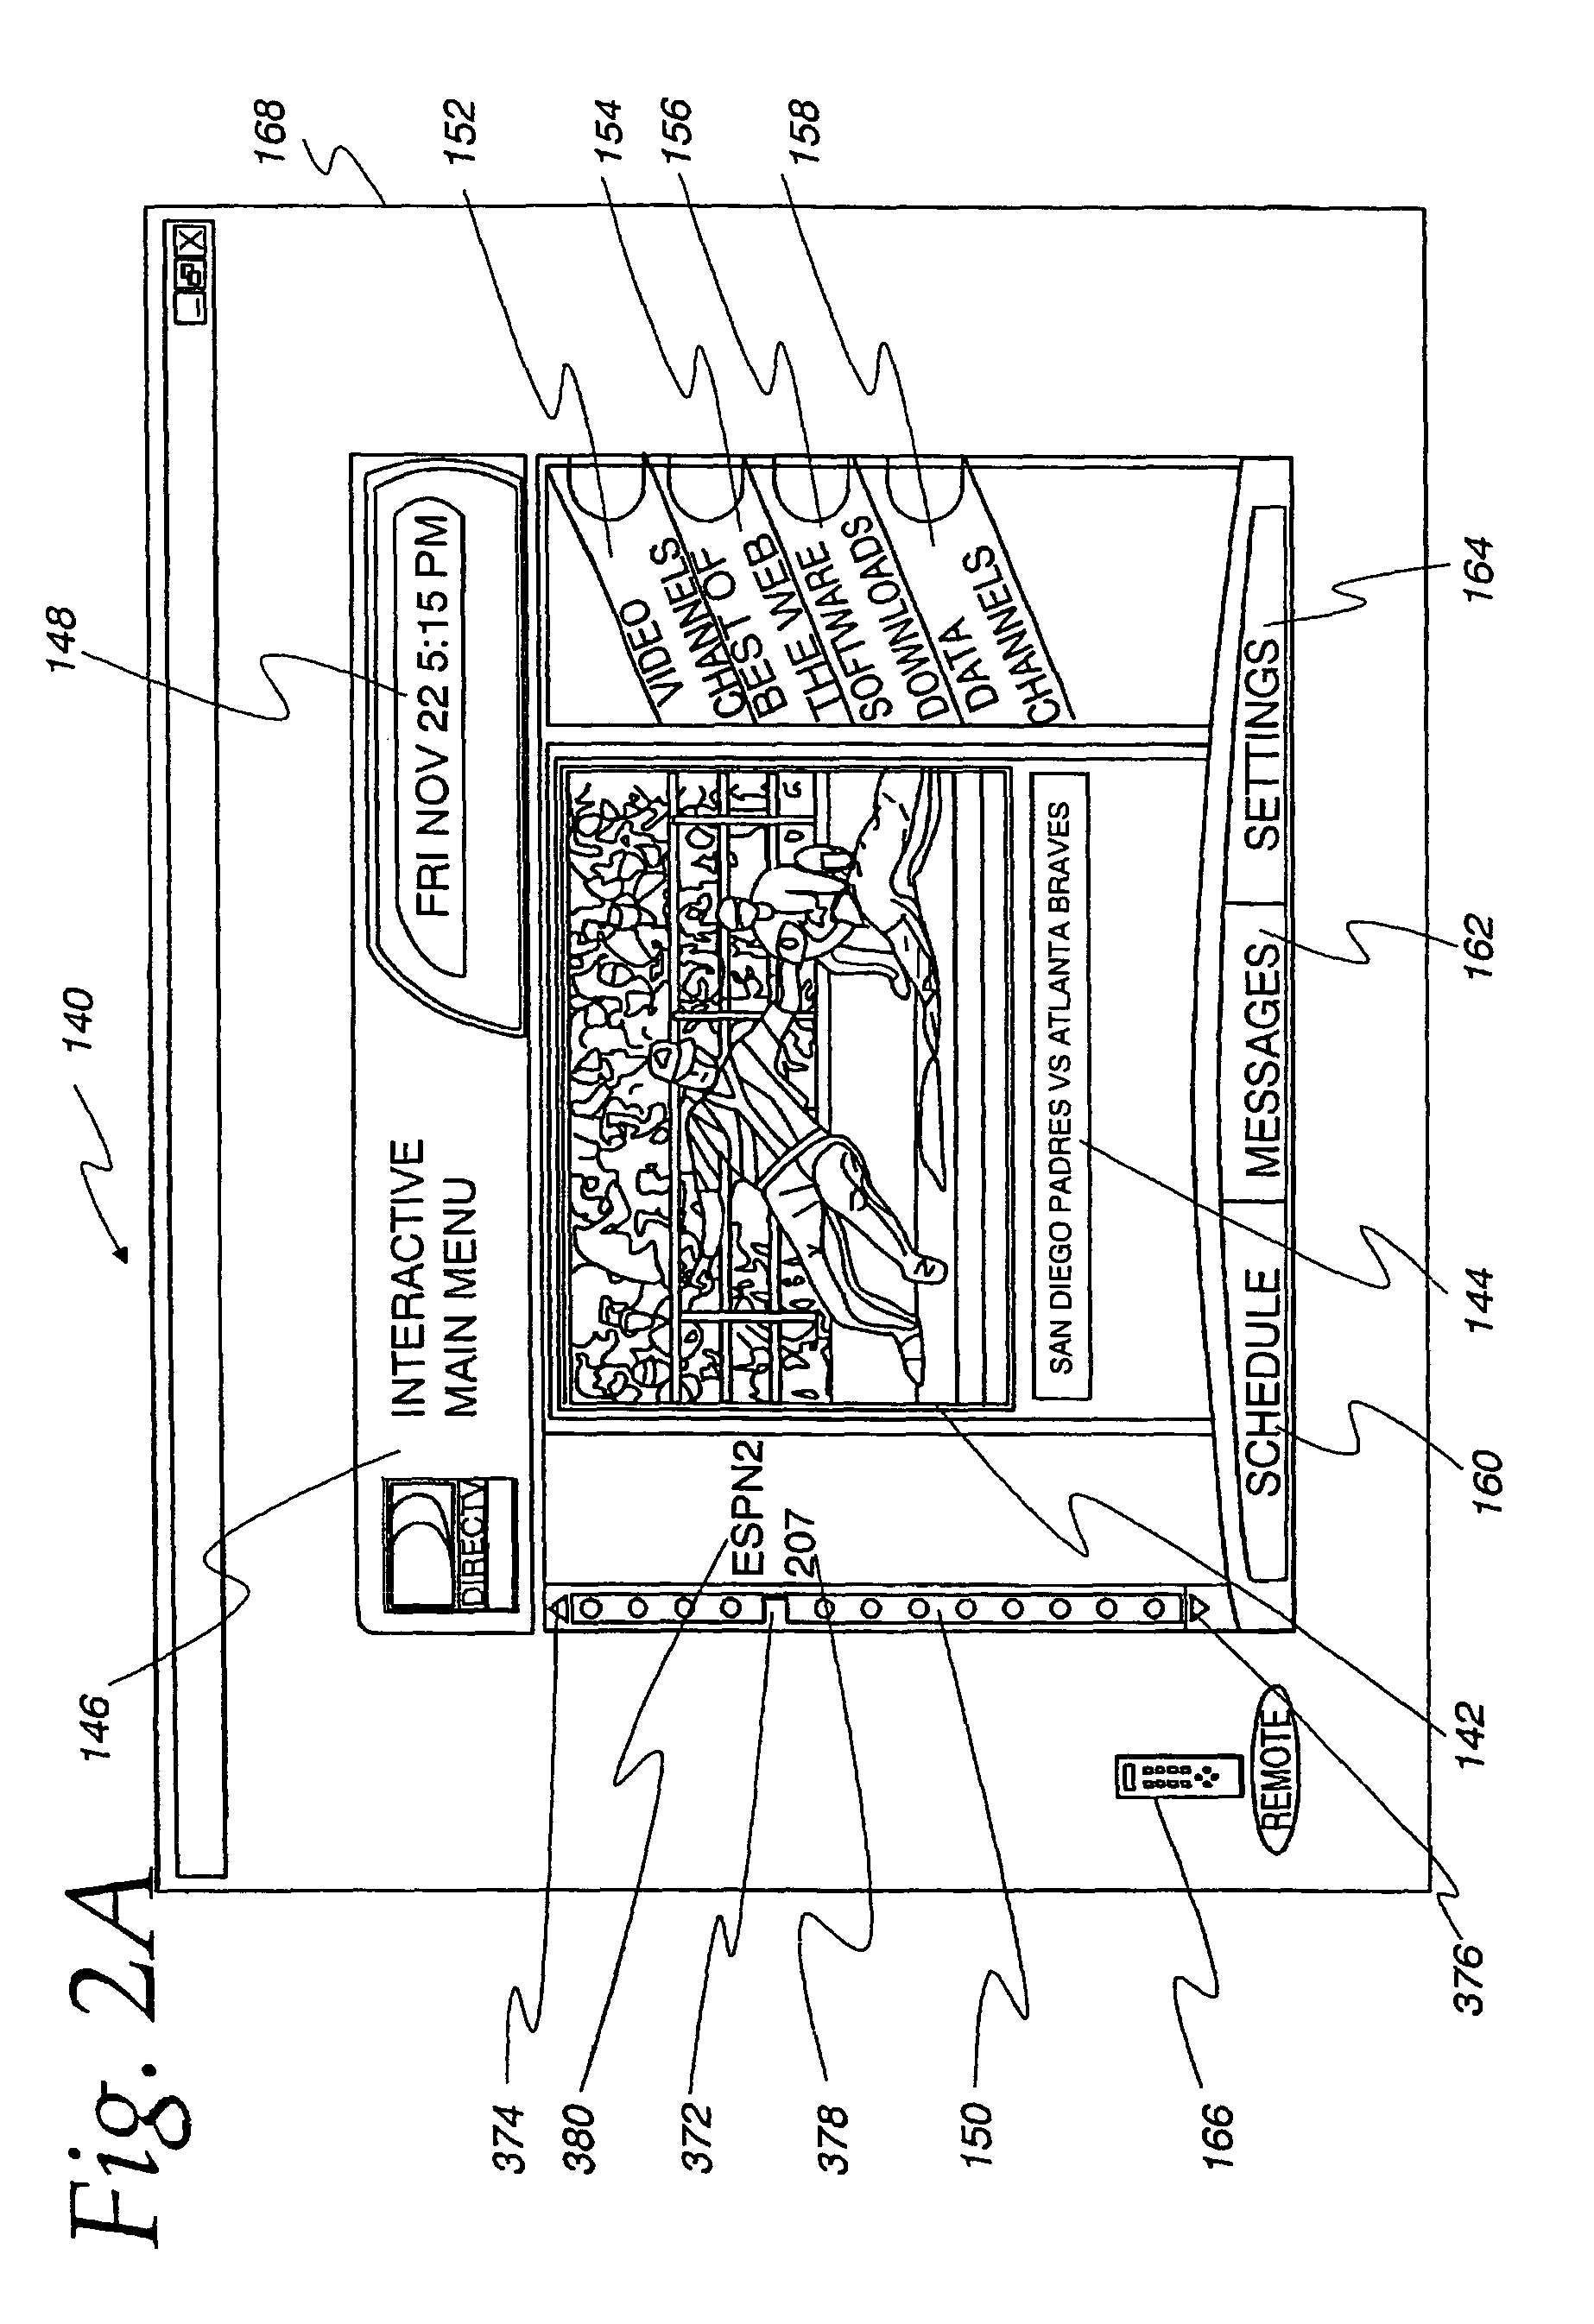 Method and apparatus for tuning used in a broadcast data system